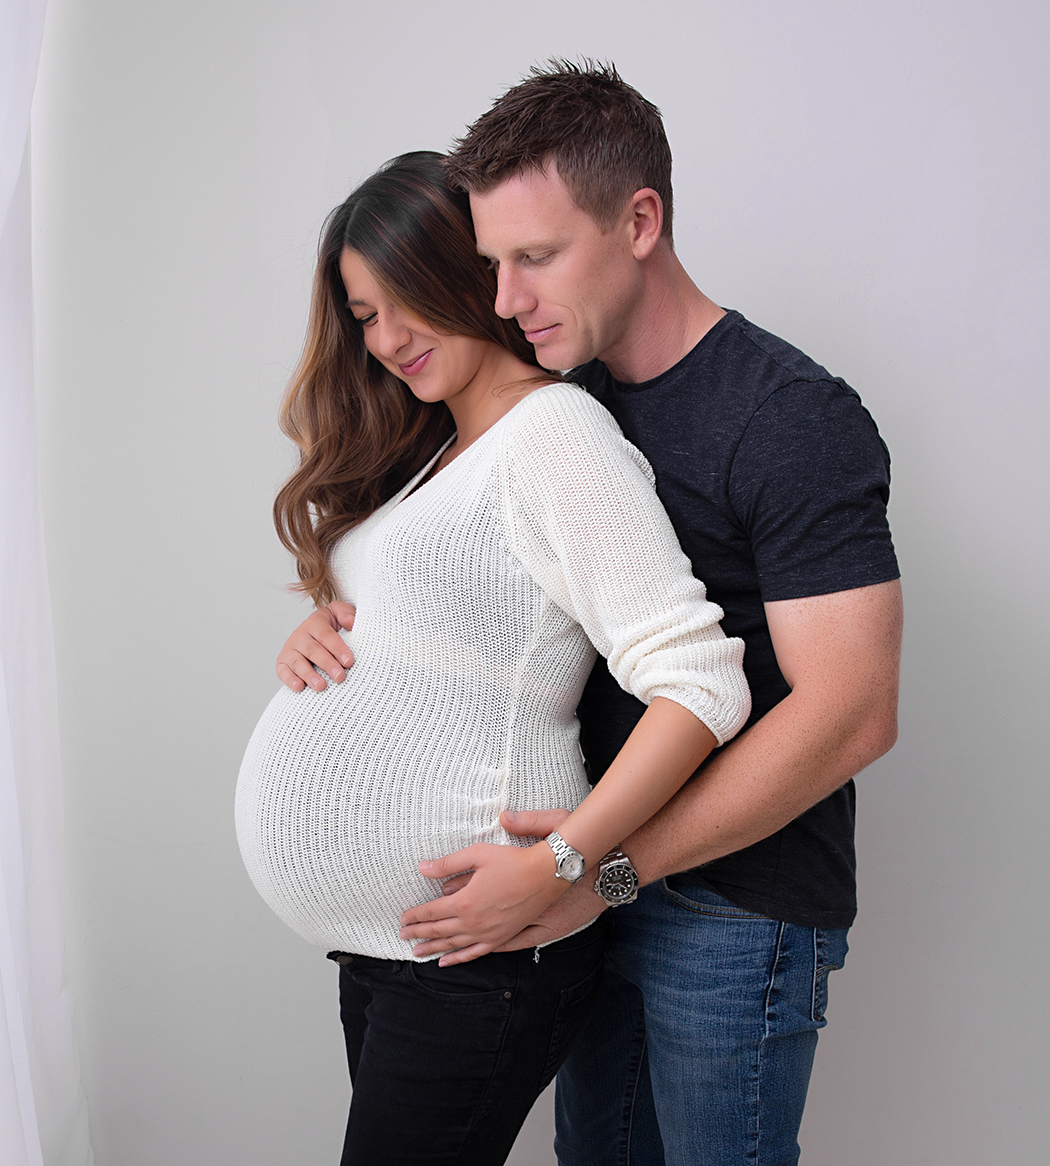 5 ways to enjoy social distancing while pregnant